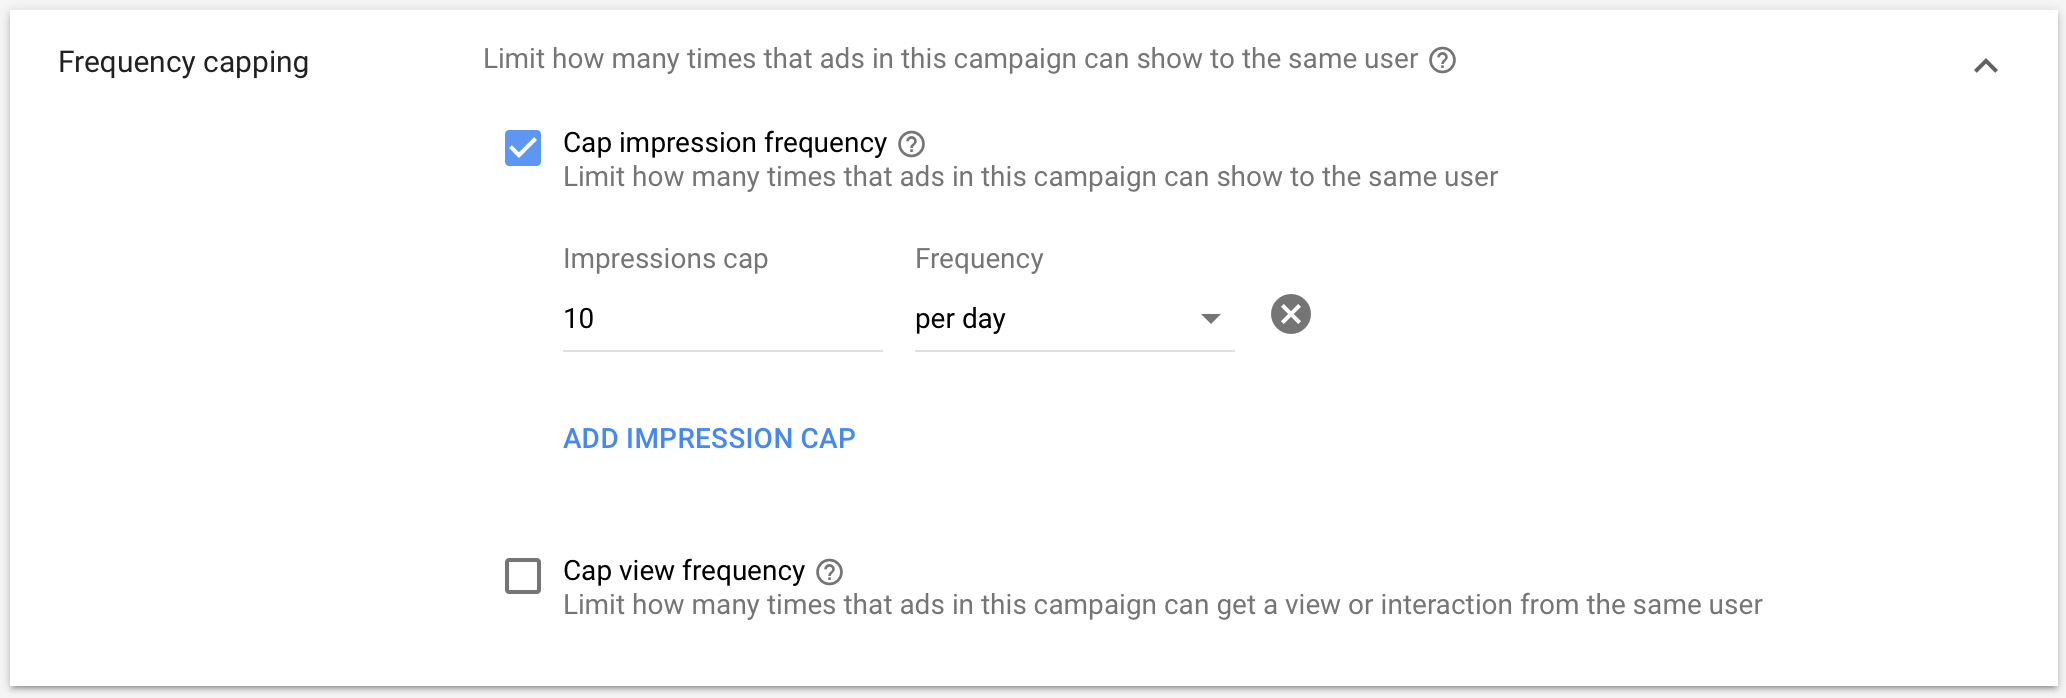 Frequency Capping In YouTube Ads